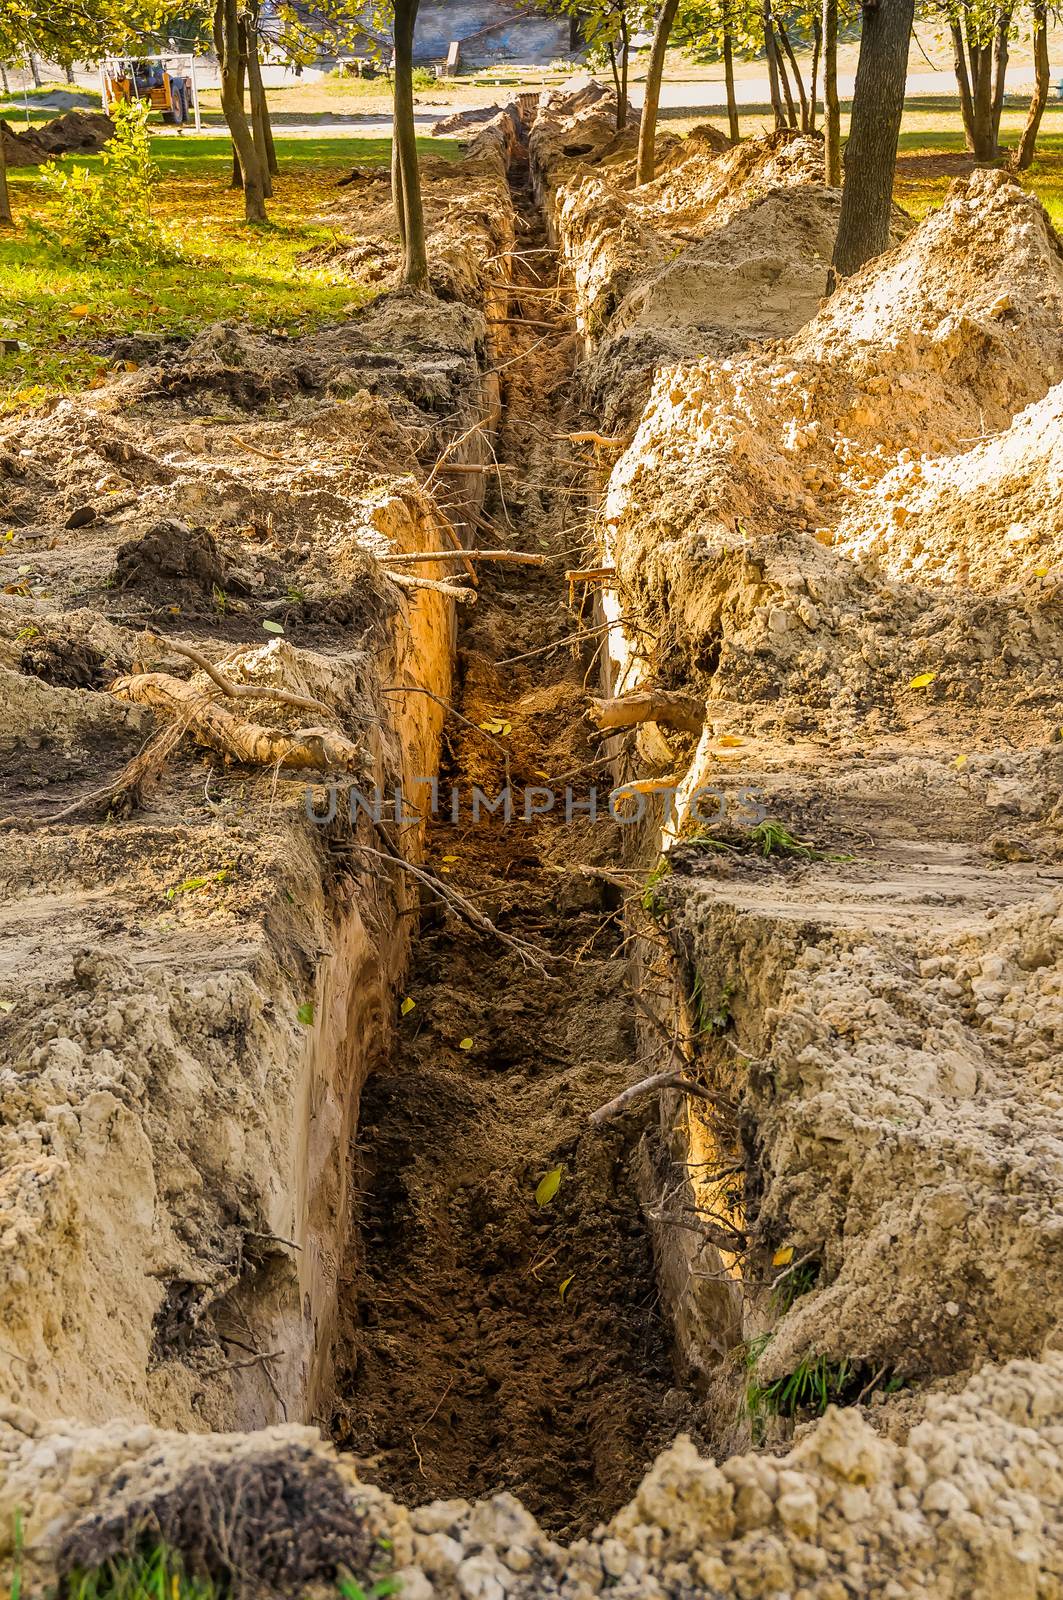 A trench in the ground for laying a pipe in the park, under the trees, with evening autumn light